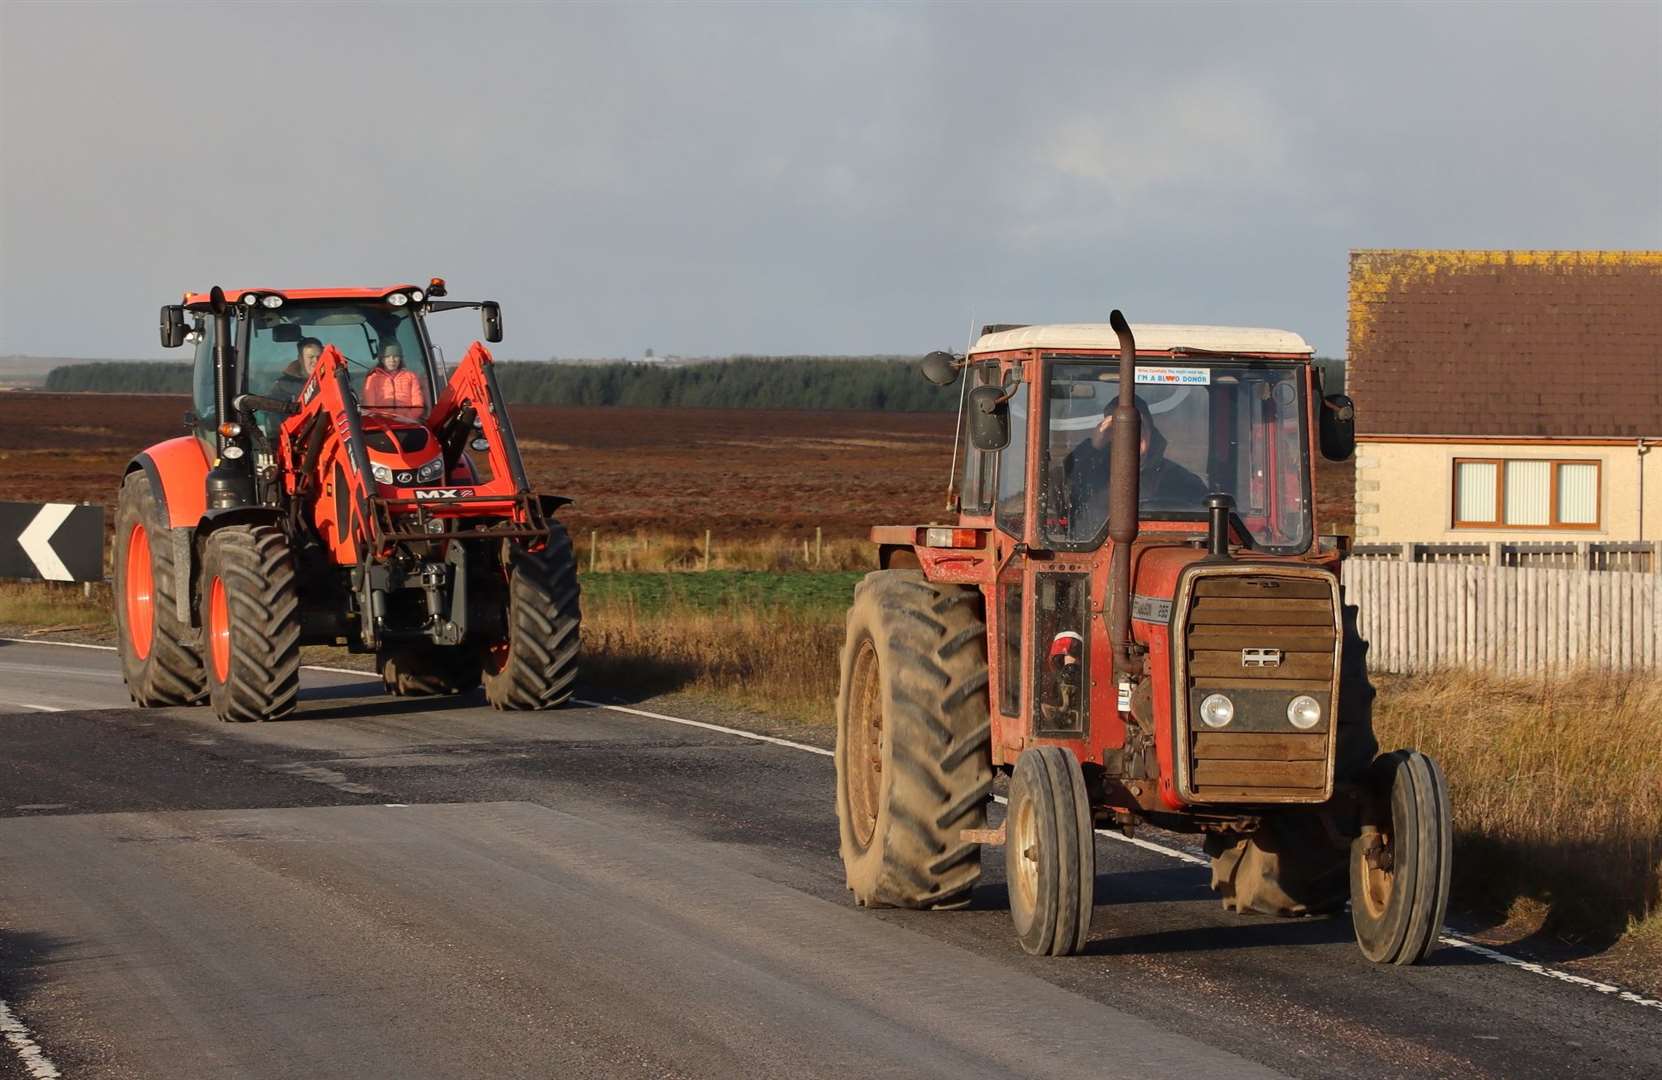 Two of the tractors at Killimster. Picture: Neil Buchan